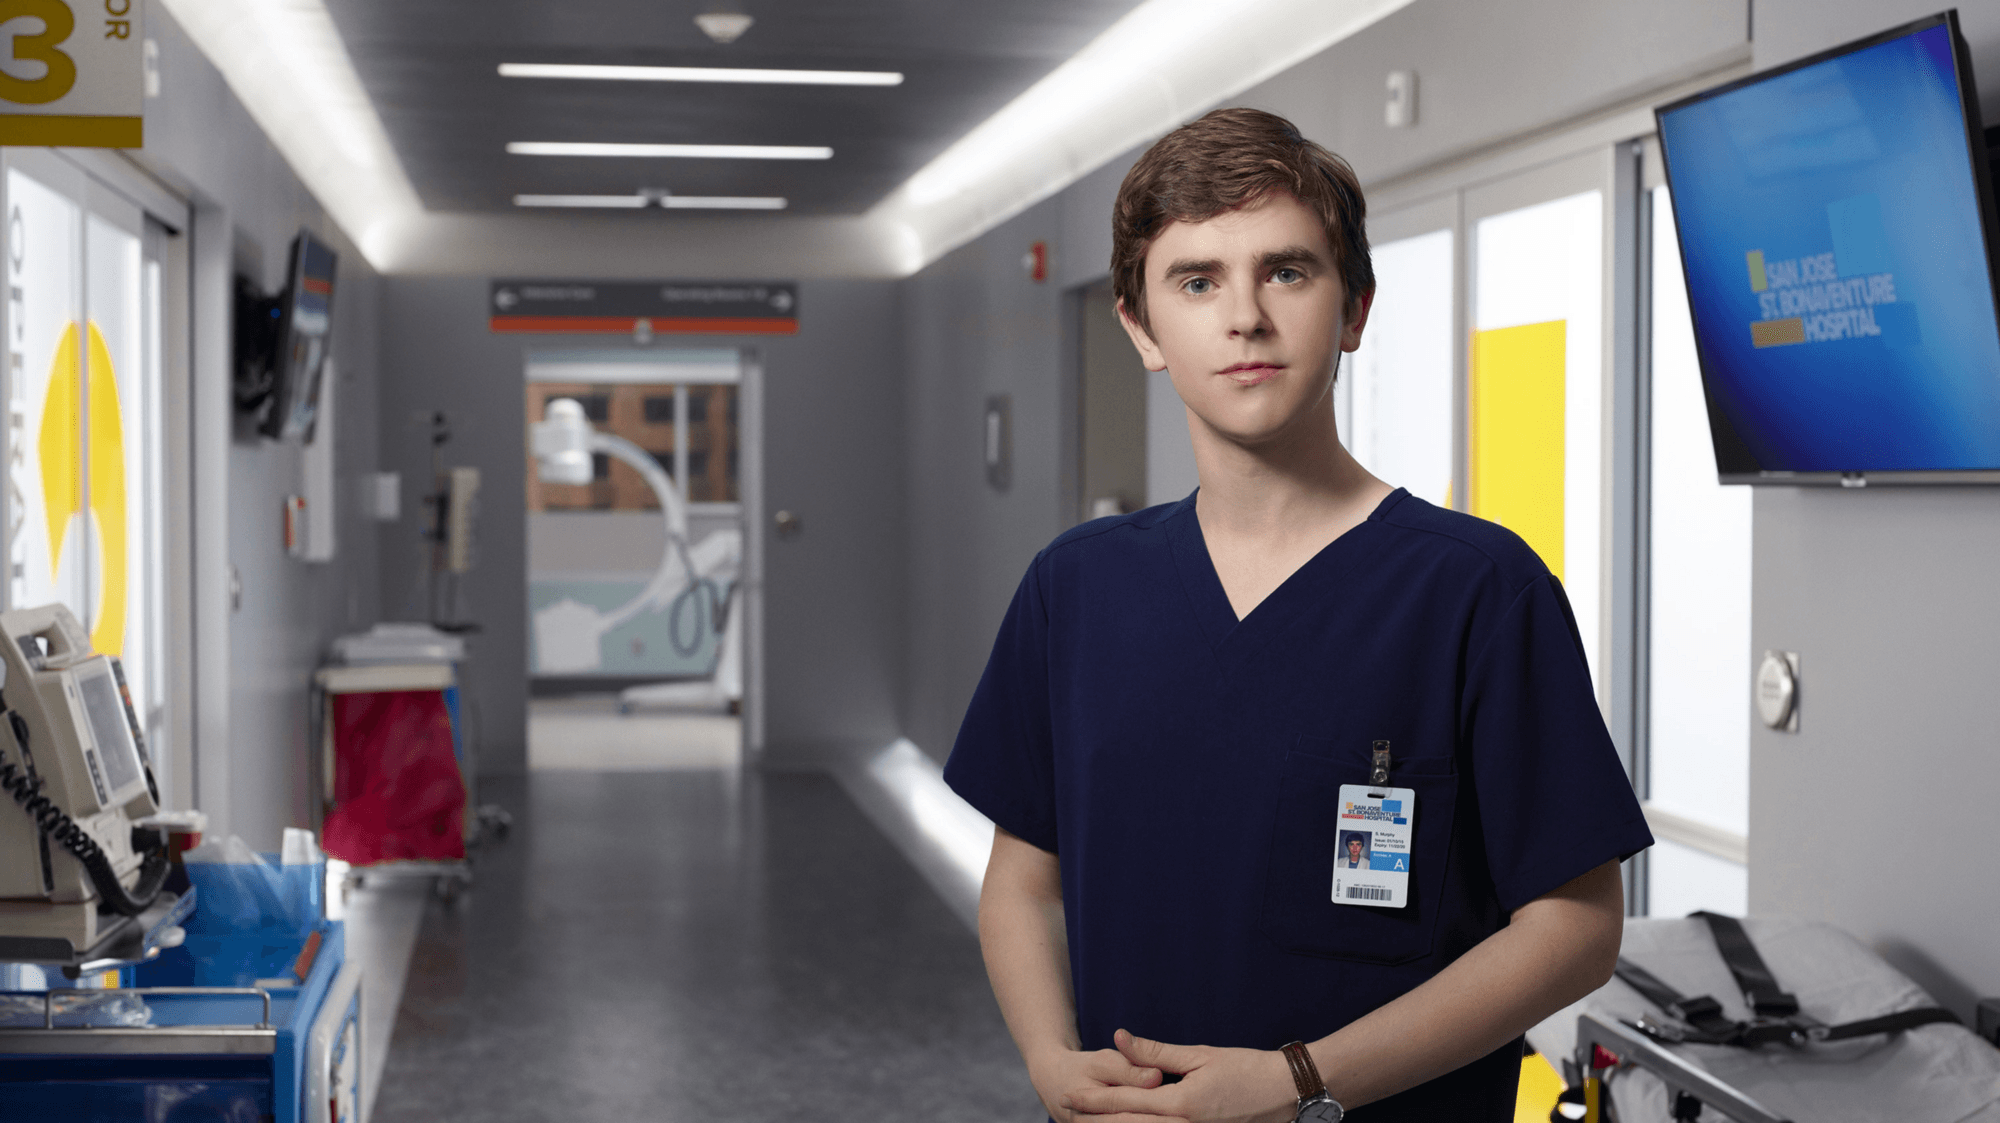 ABC's THE GOOD DOCTOR